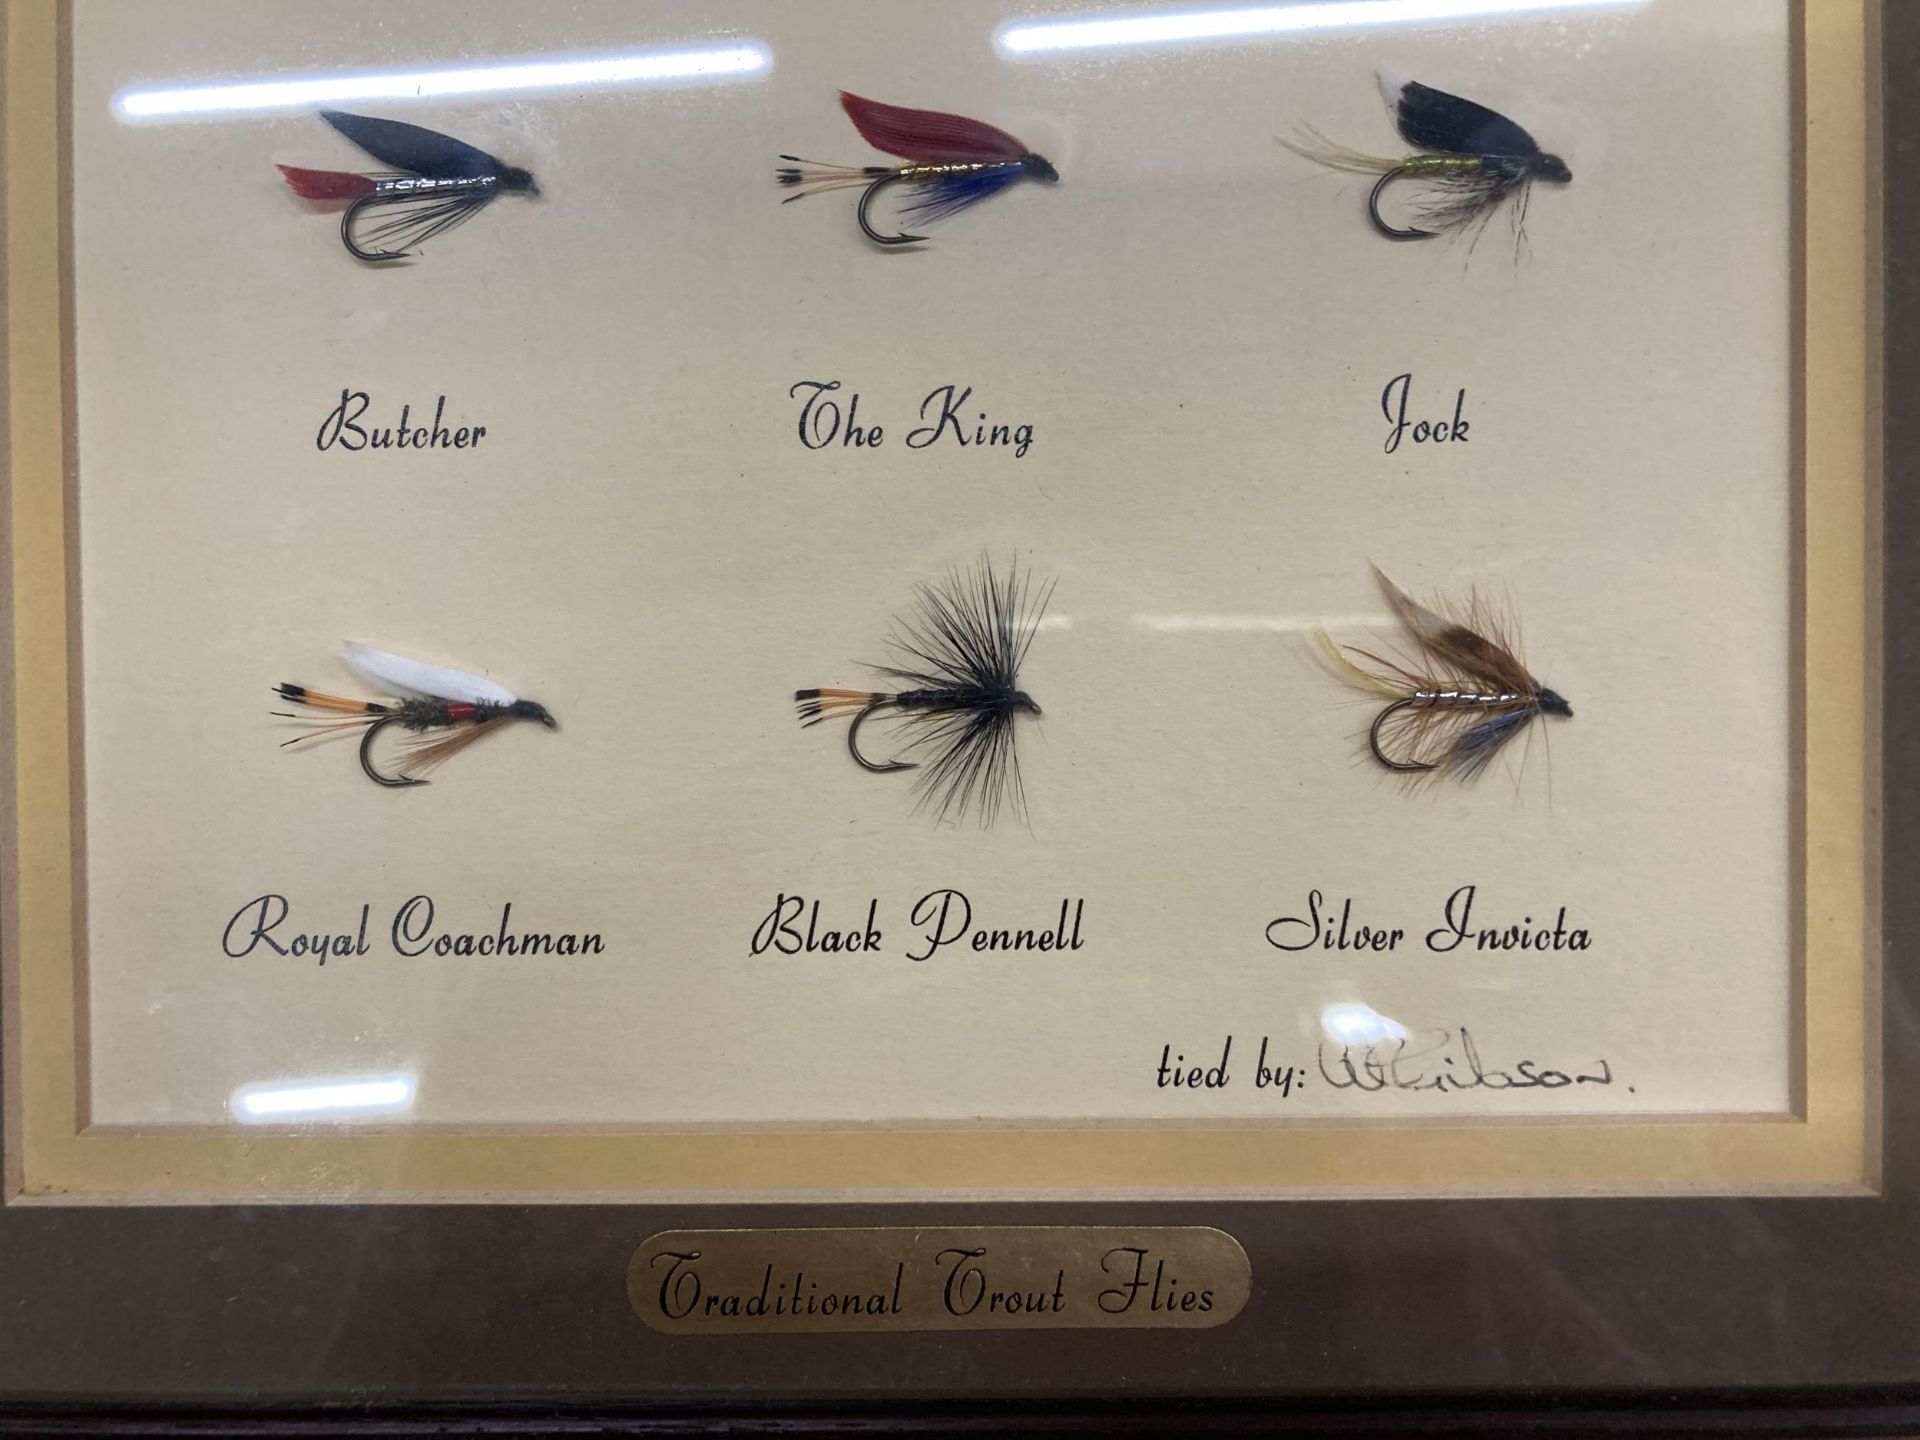 A FRAMED TRADITIONAL TROUT FLIES FISHING MONTAGE PICTURE - Image 2 of 2